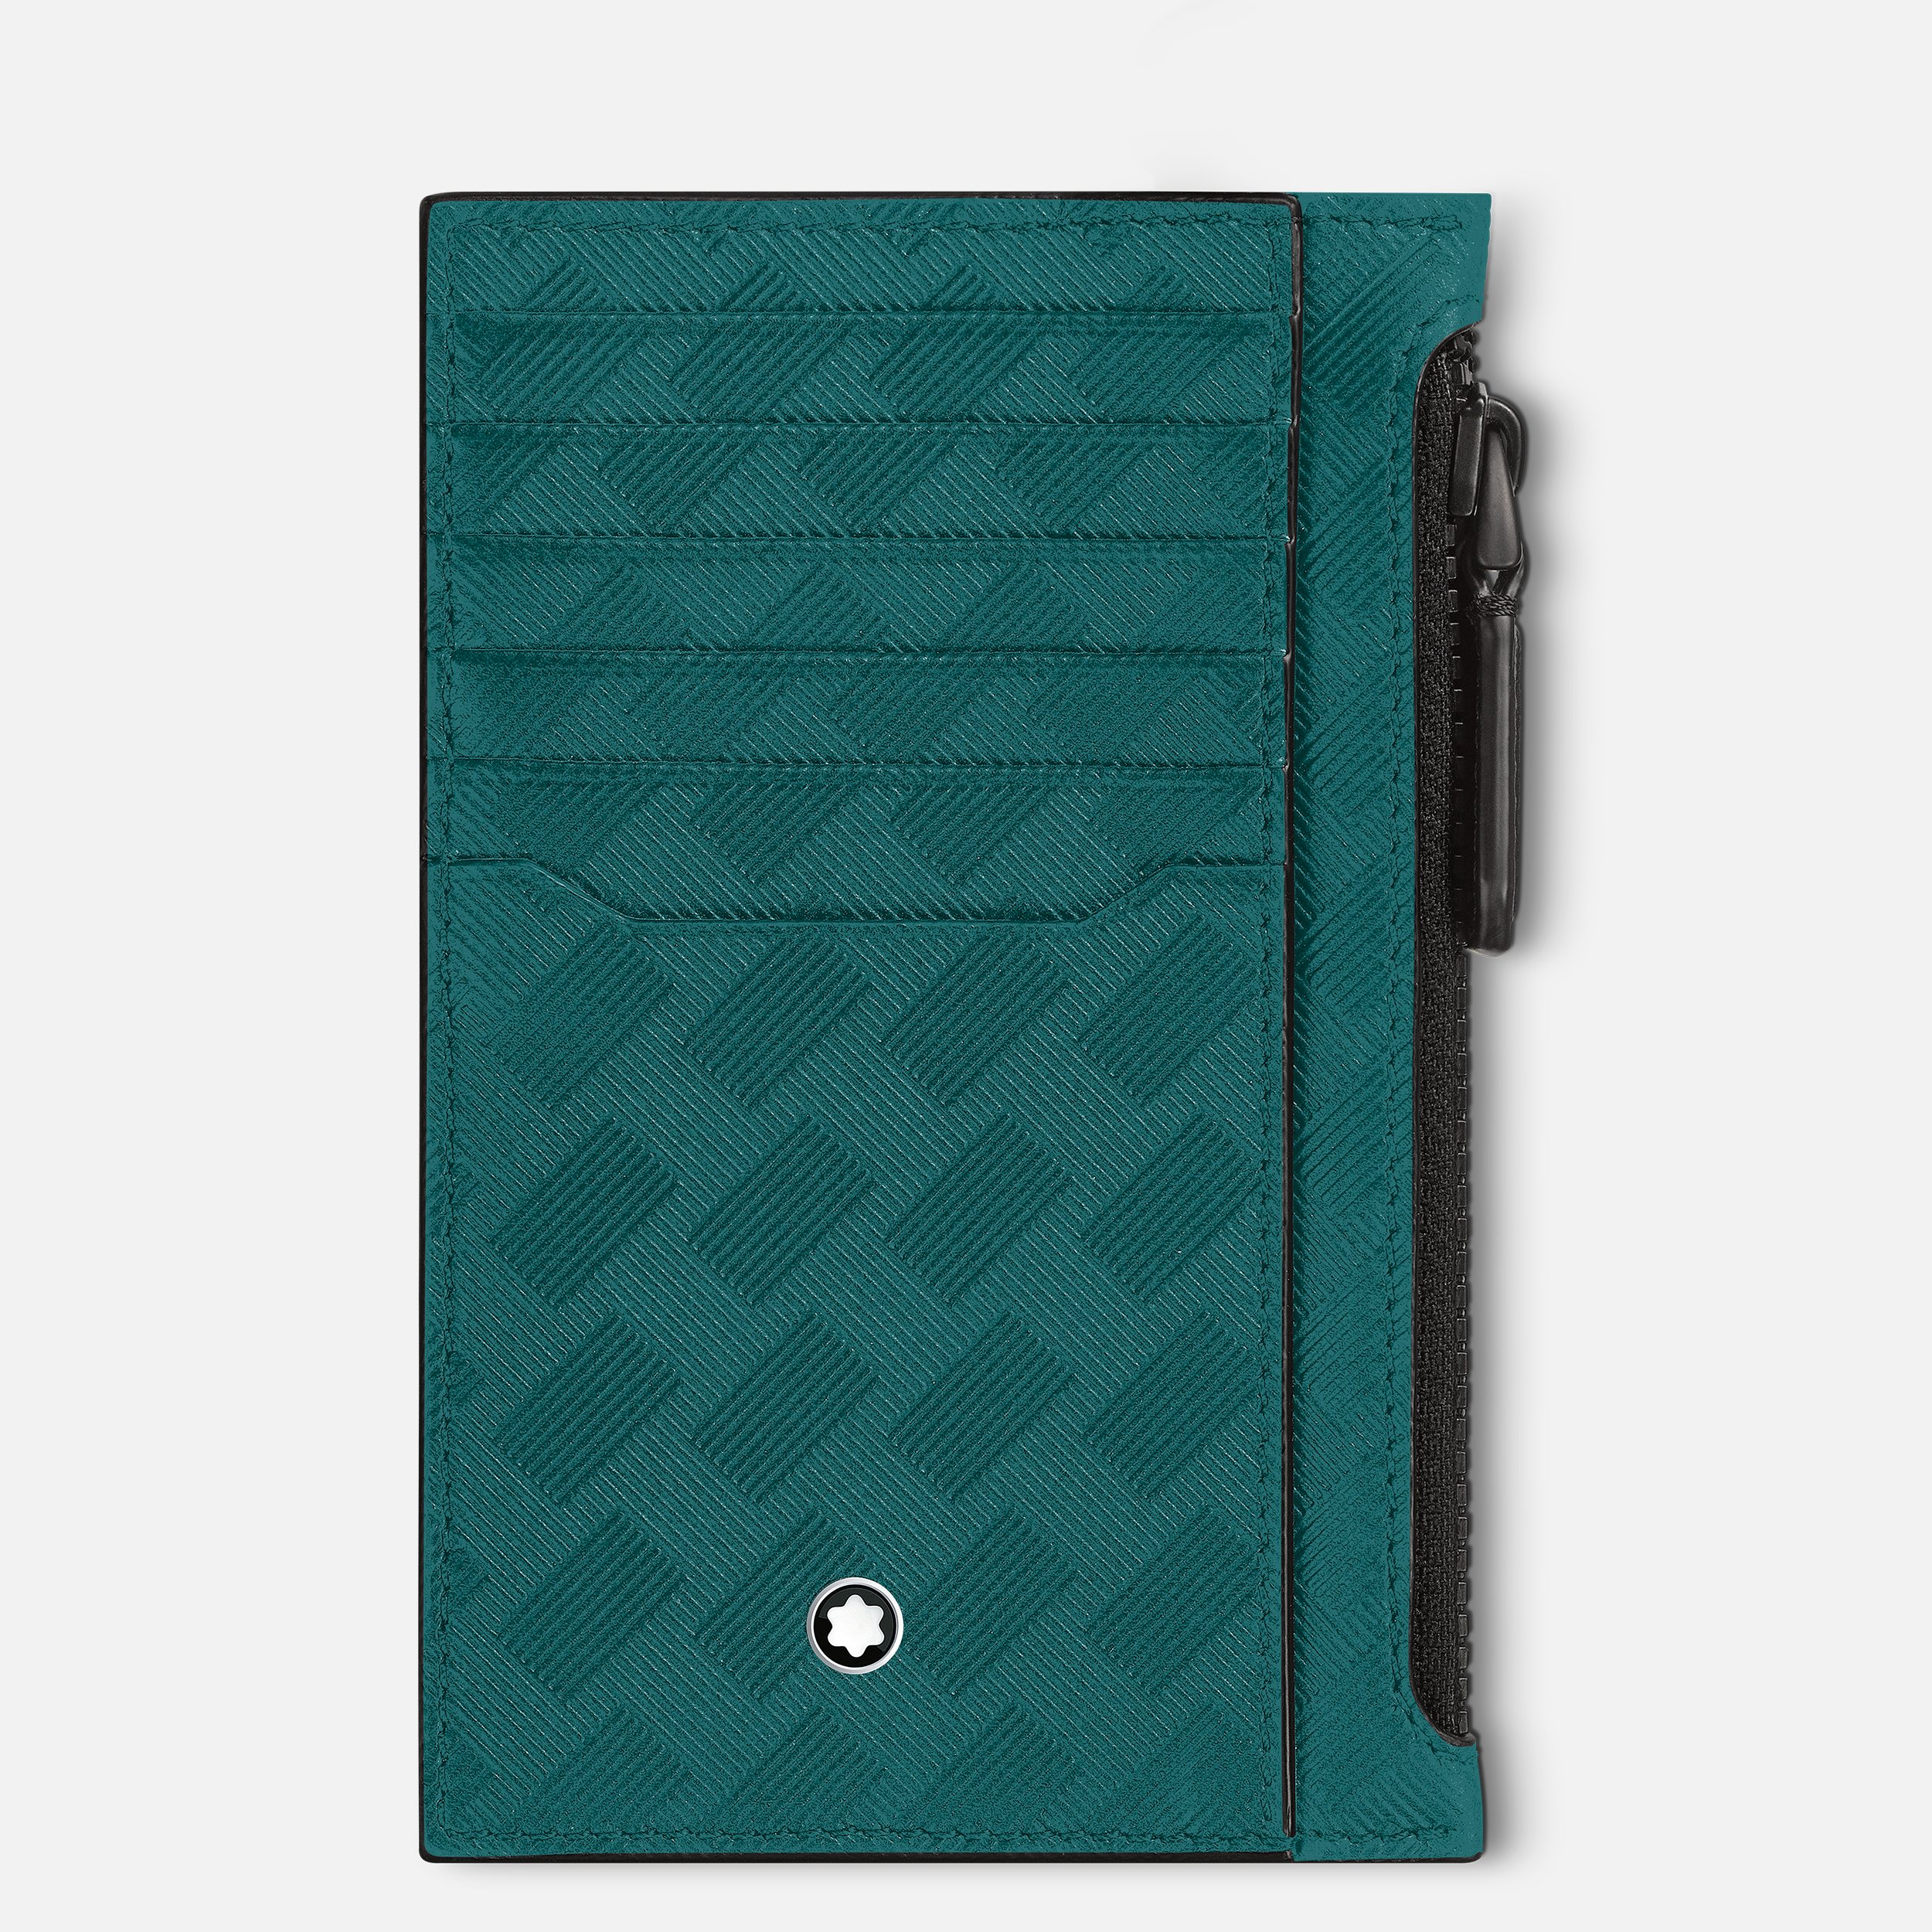 Montblanc - Extreme 3.0 - Card Holder 8cc Green with zipped pocket